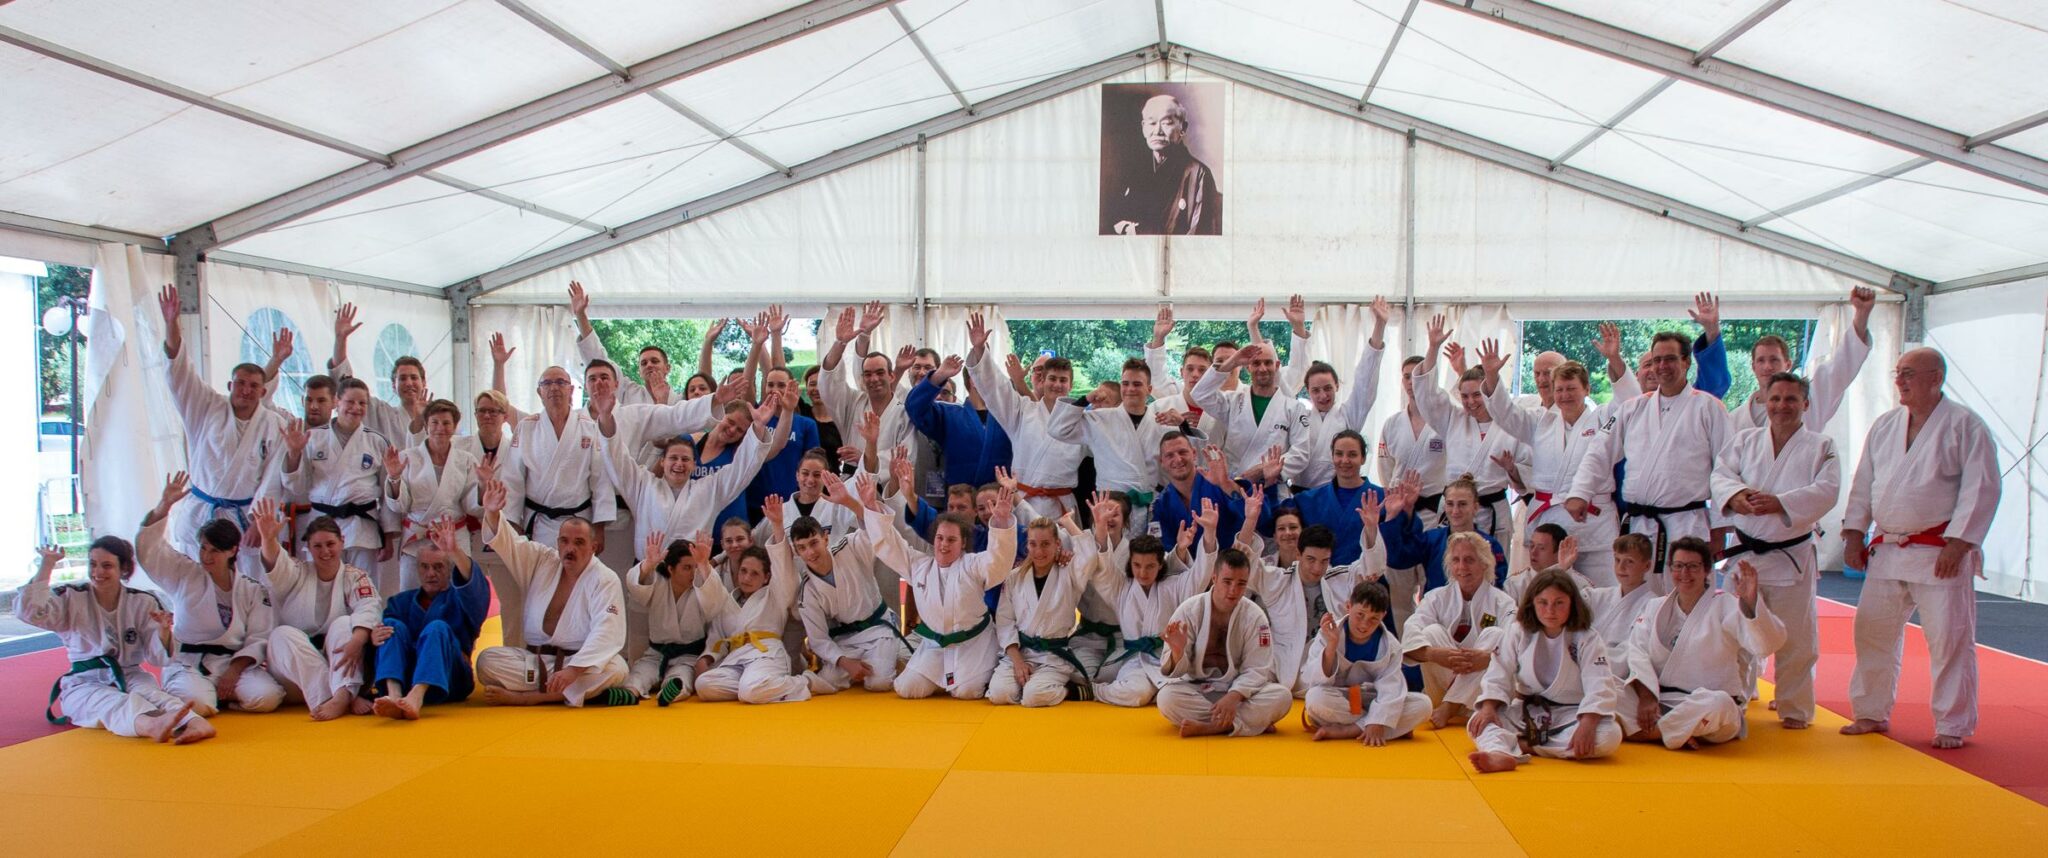 ADAPTED JUDO COMMISSION CREATED TO IMPROVE INTERNATIONAL INCLUSION FOR JUDO COMMUNITY